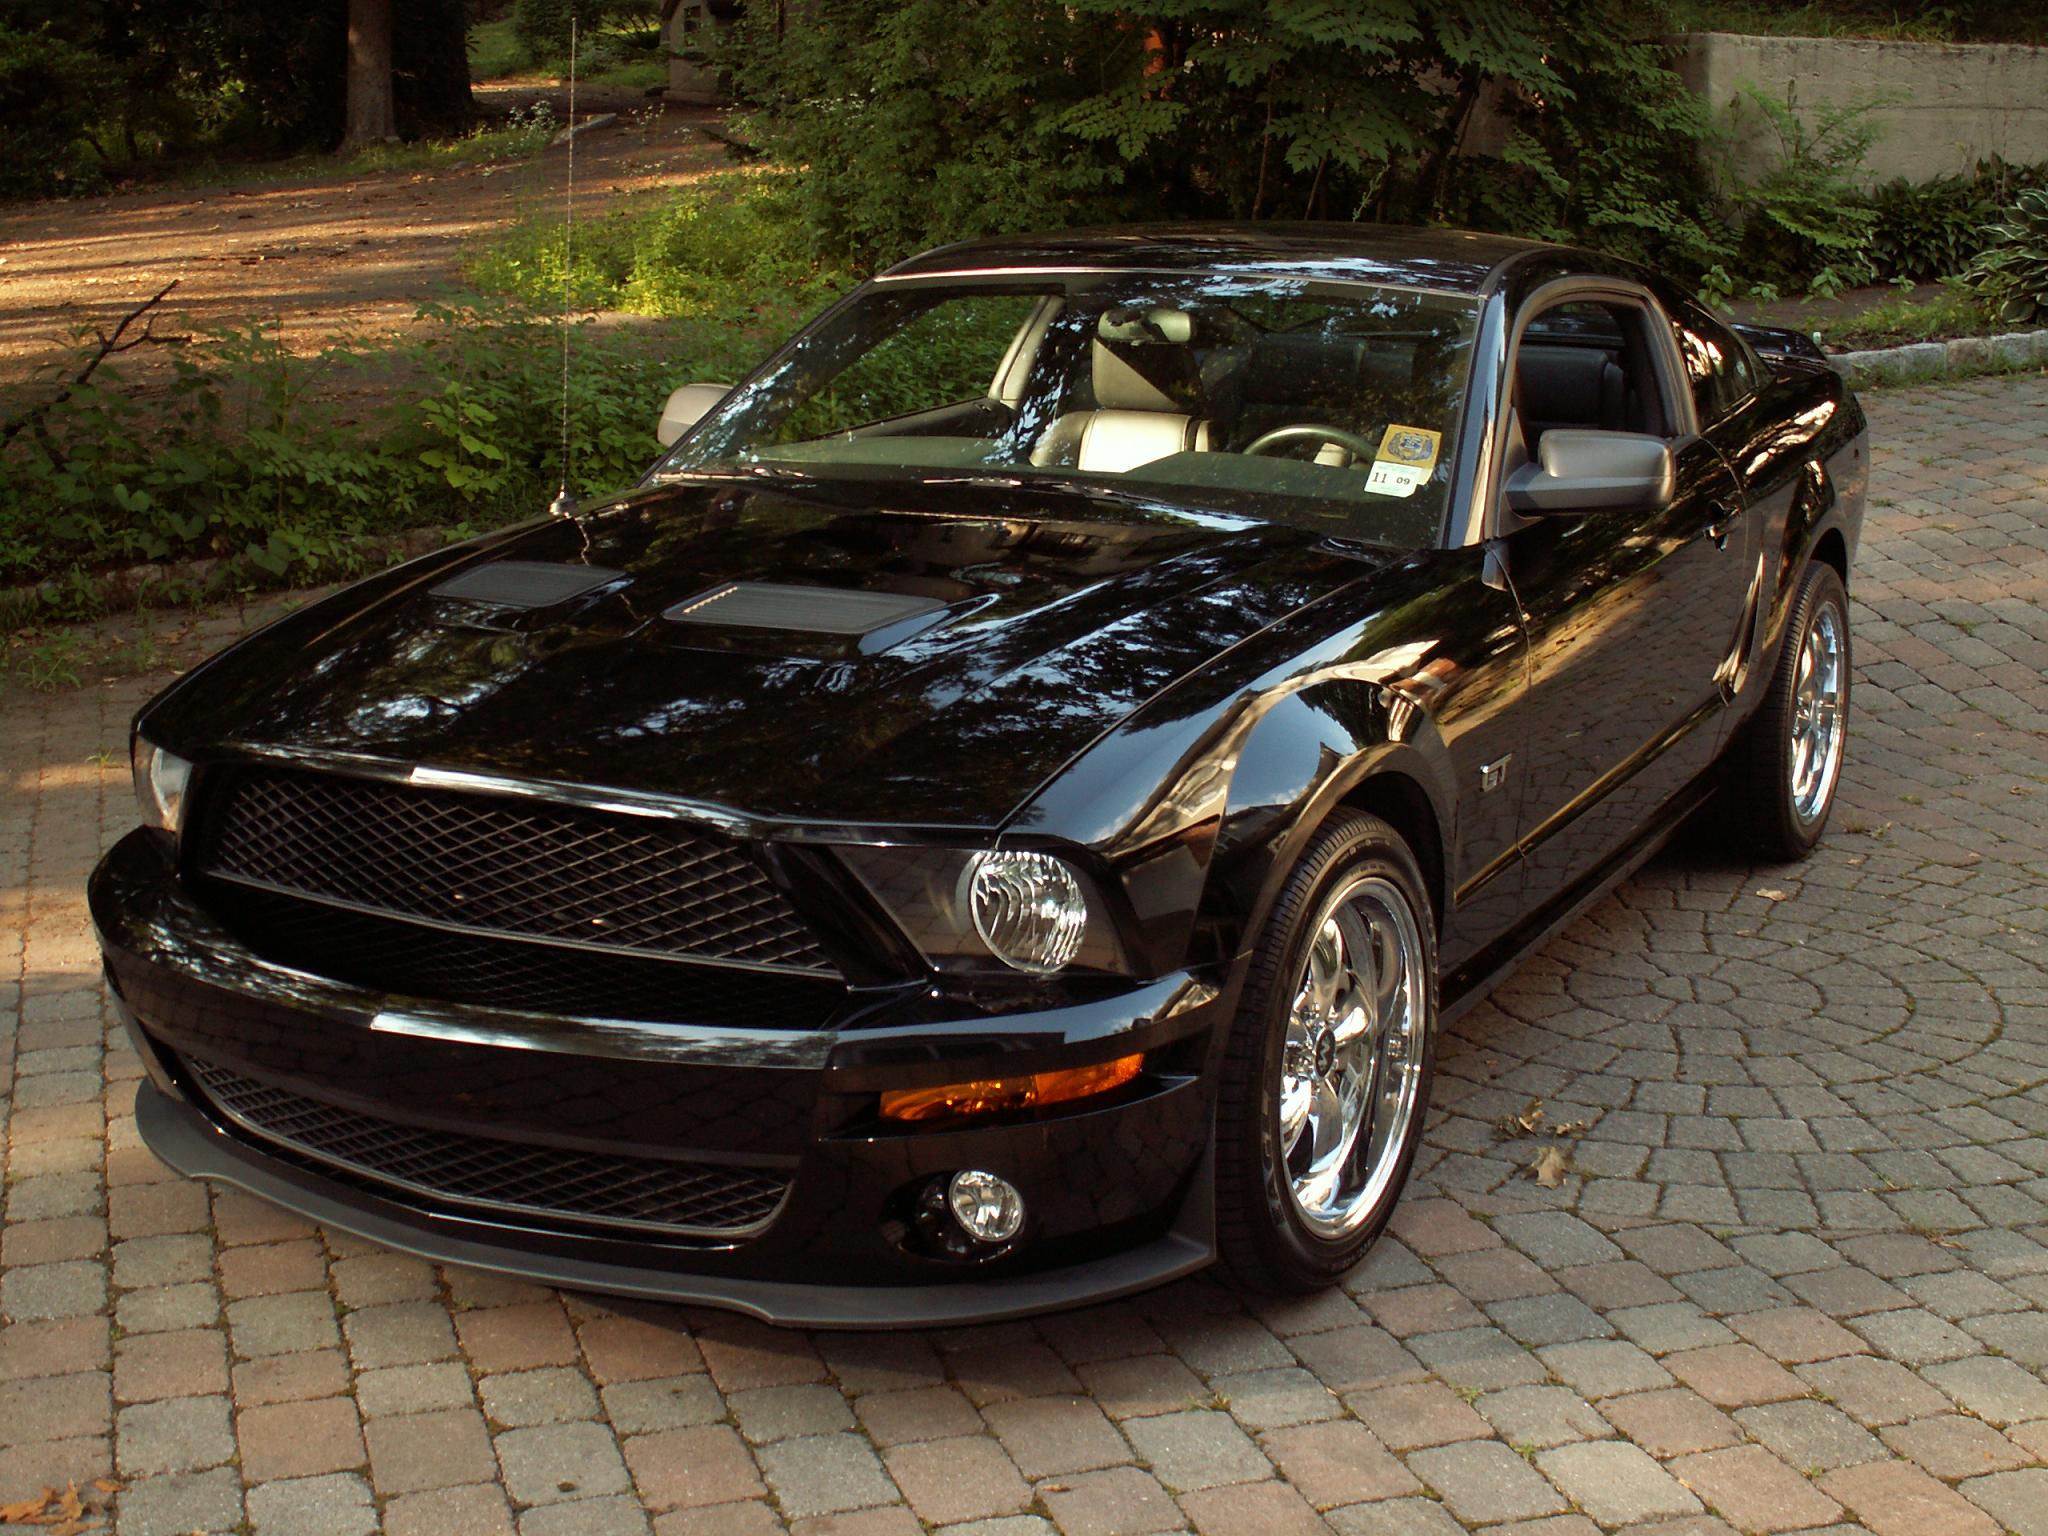 2006 Ford mustang gt 0-60 times #5